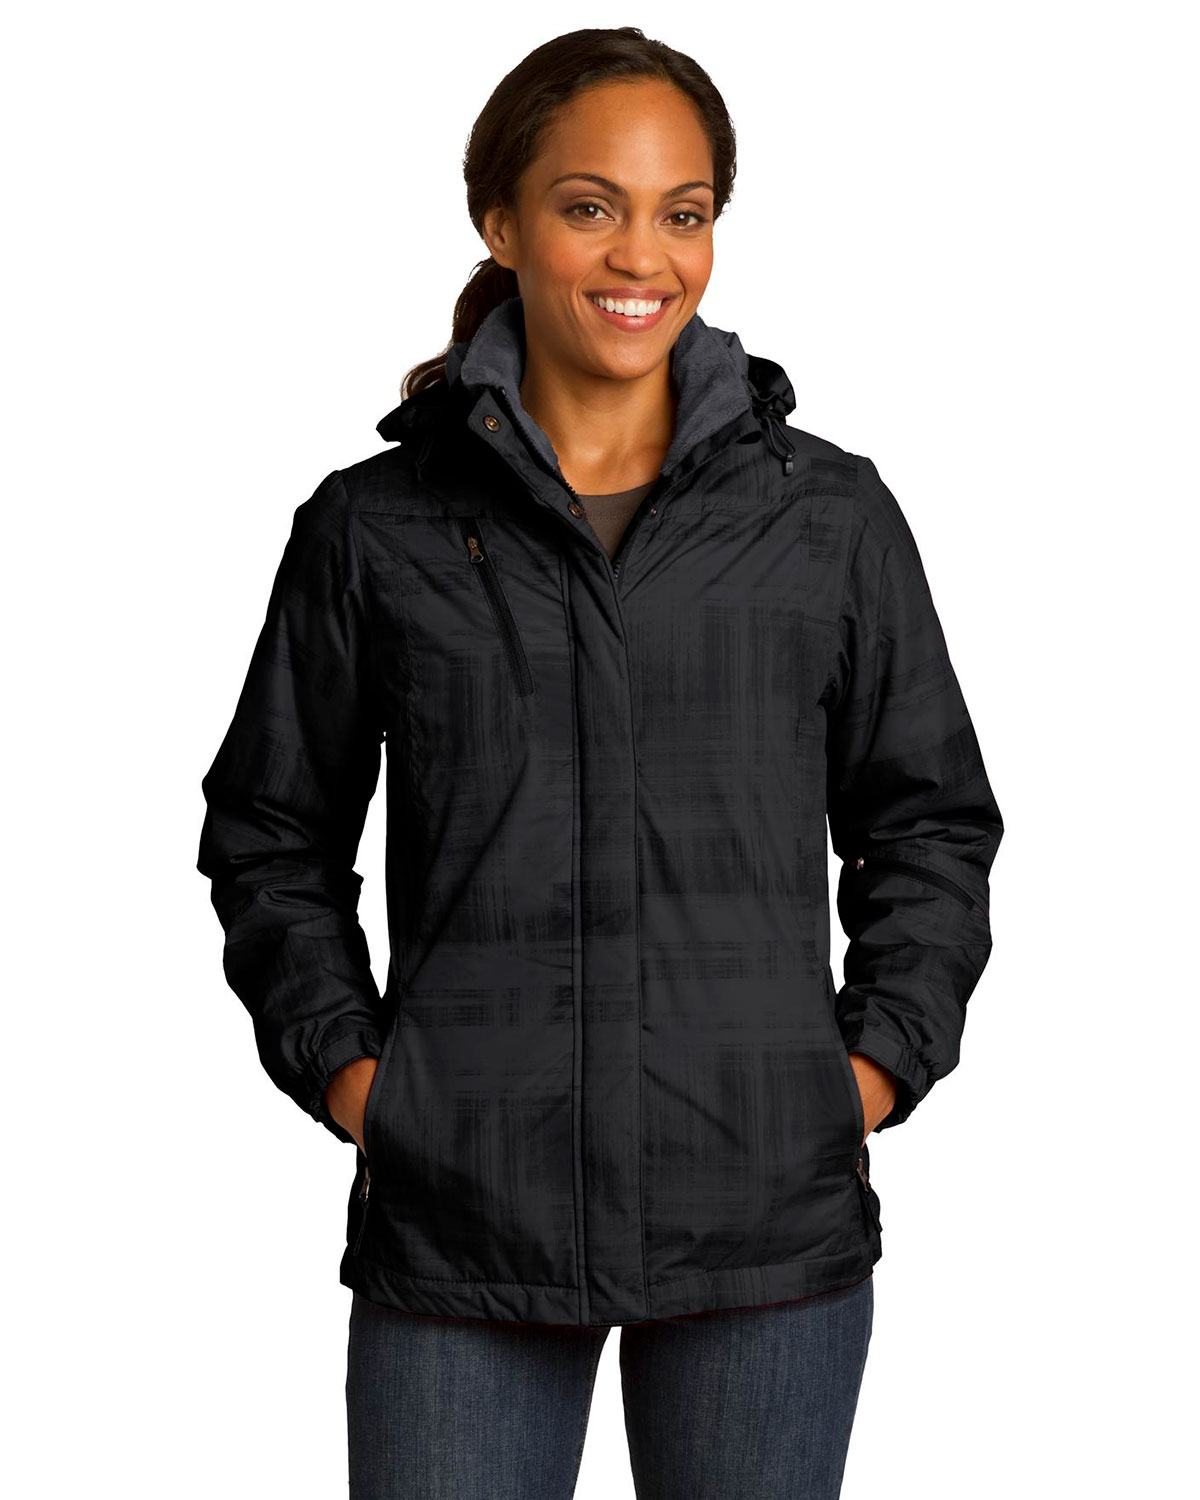 Port Authority L320 Women Brushstroke Print Insulated Jacket at Apparelstation